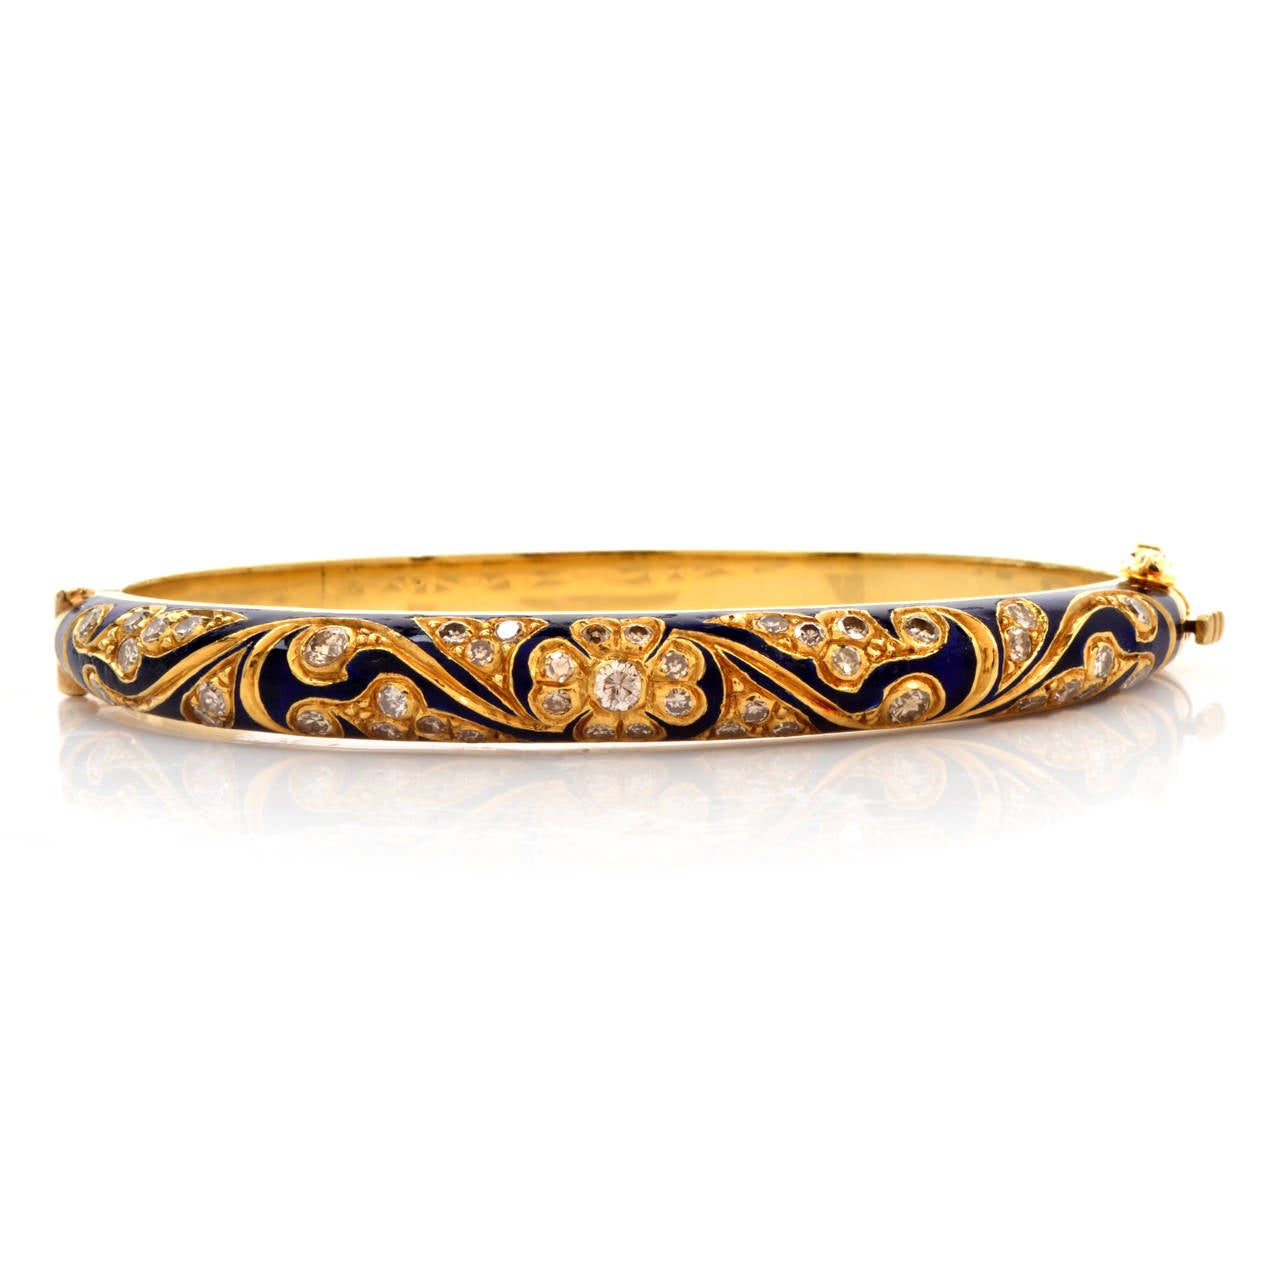 This bangle bracelet of absorbing aesthetic and Italian provenance is crafted in solid 18K yellow gold, weighing approximately 38.6 grams and measuring approx  7